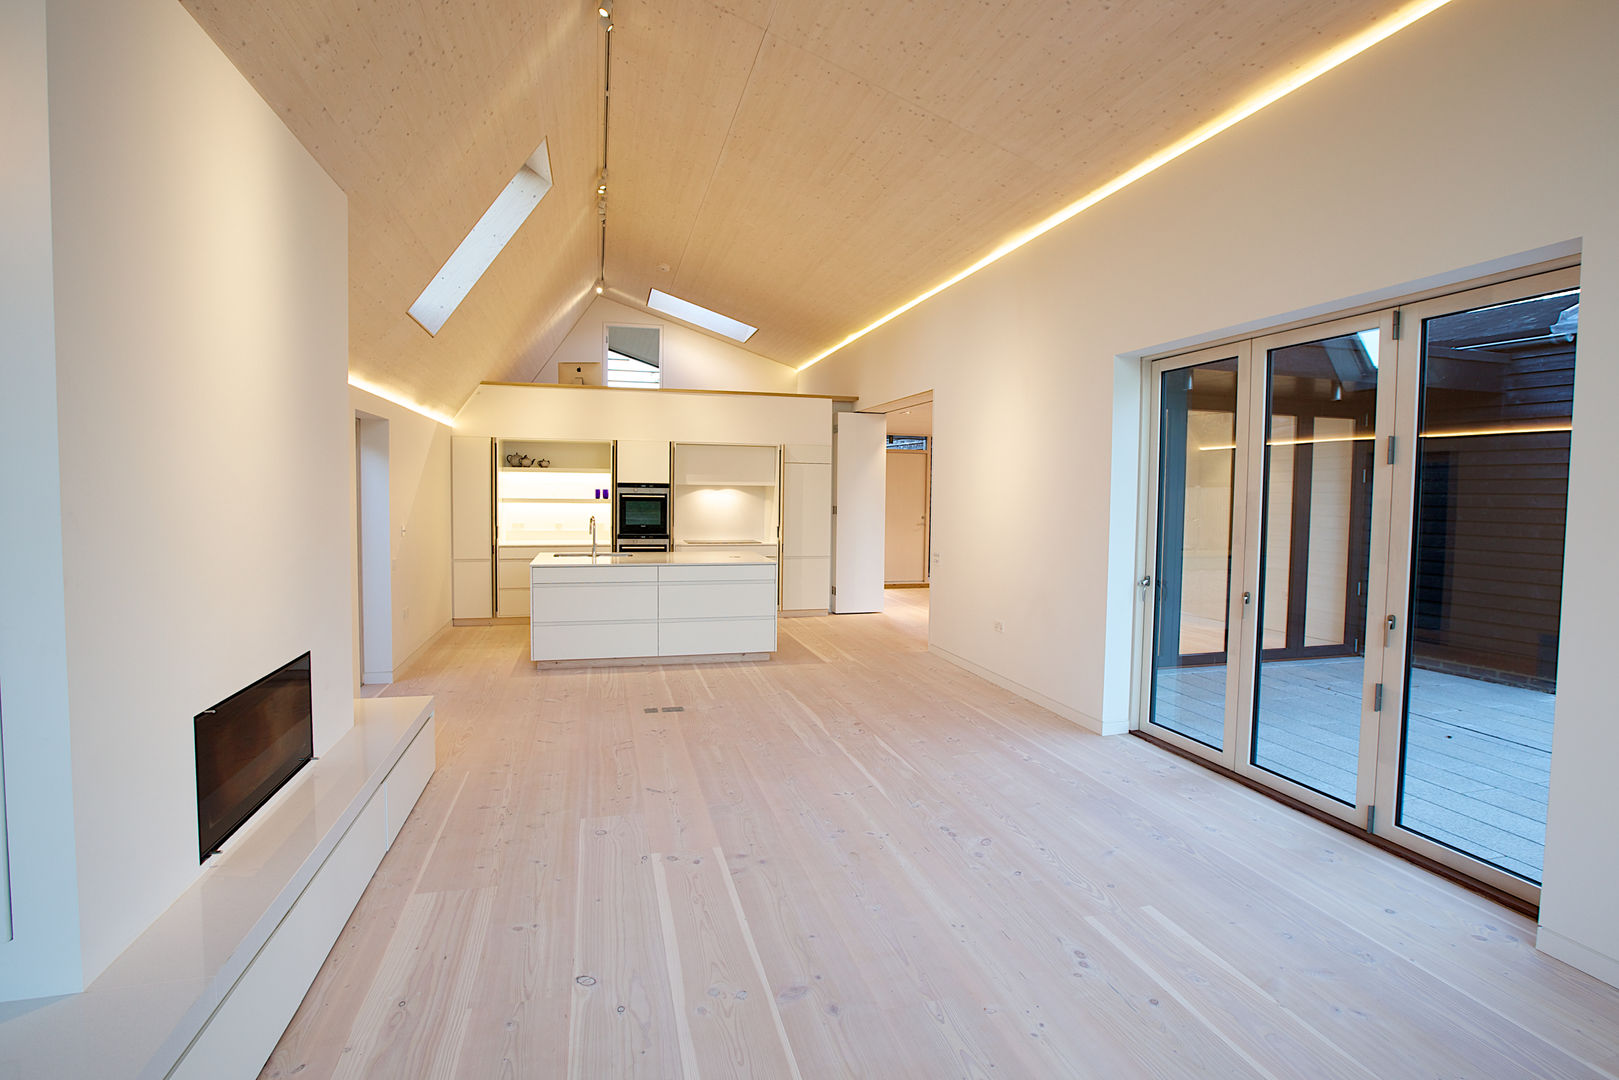 ​The open plan kitchen and living room at the Bourne Lane Eco House. Nash Baker Architects Ltd Salas modernas